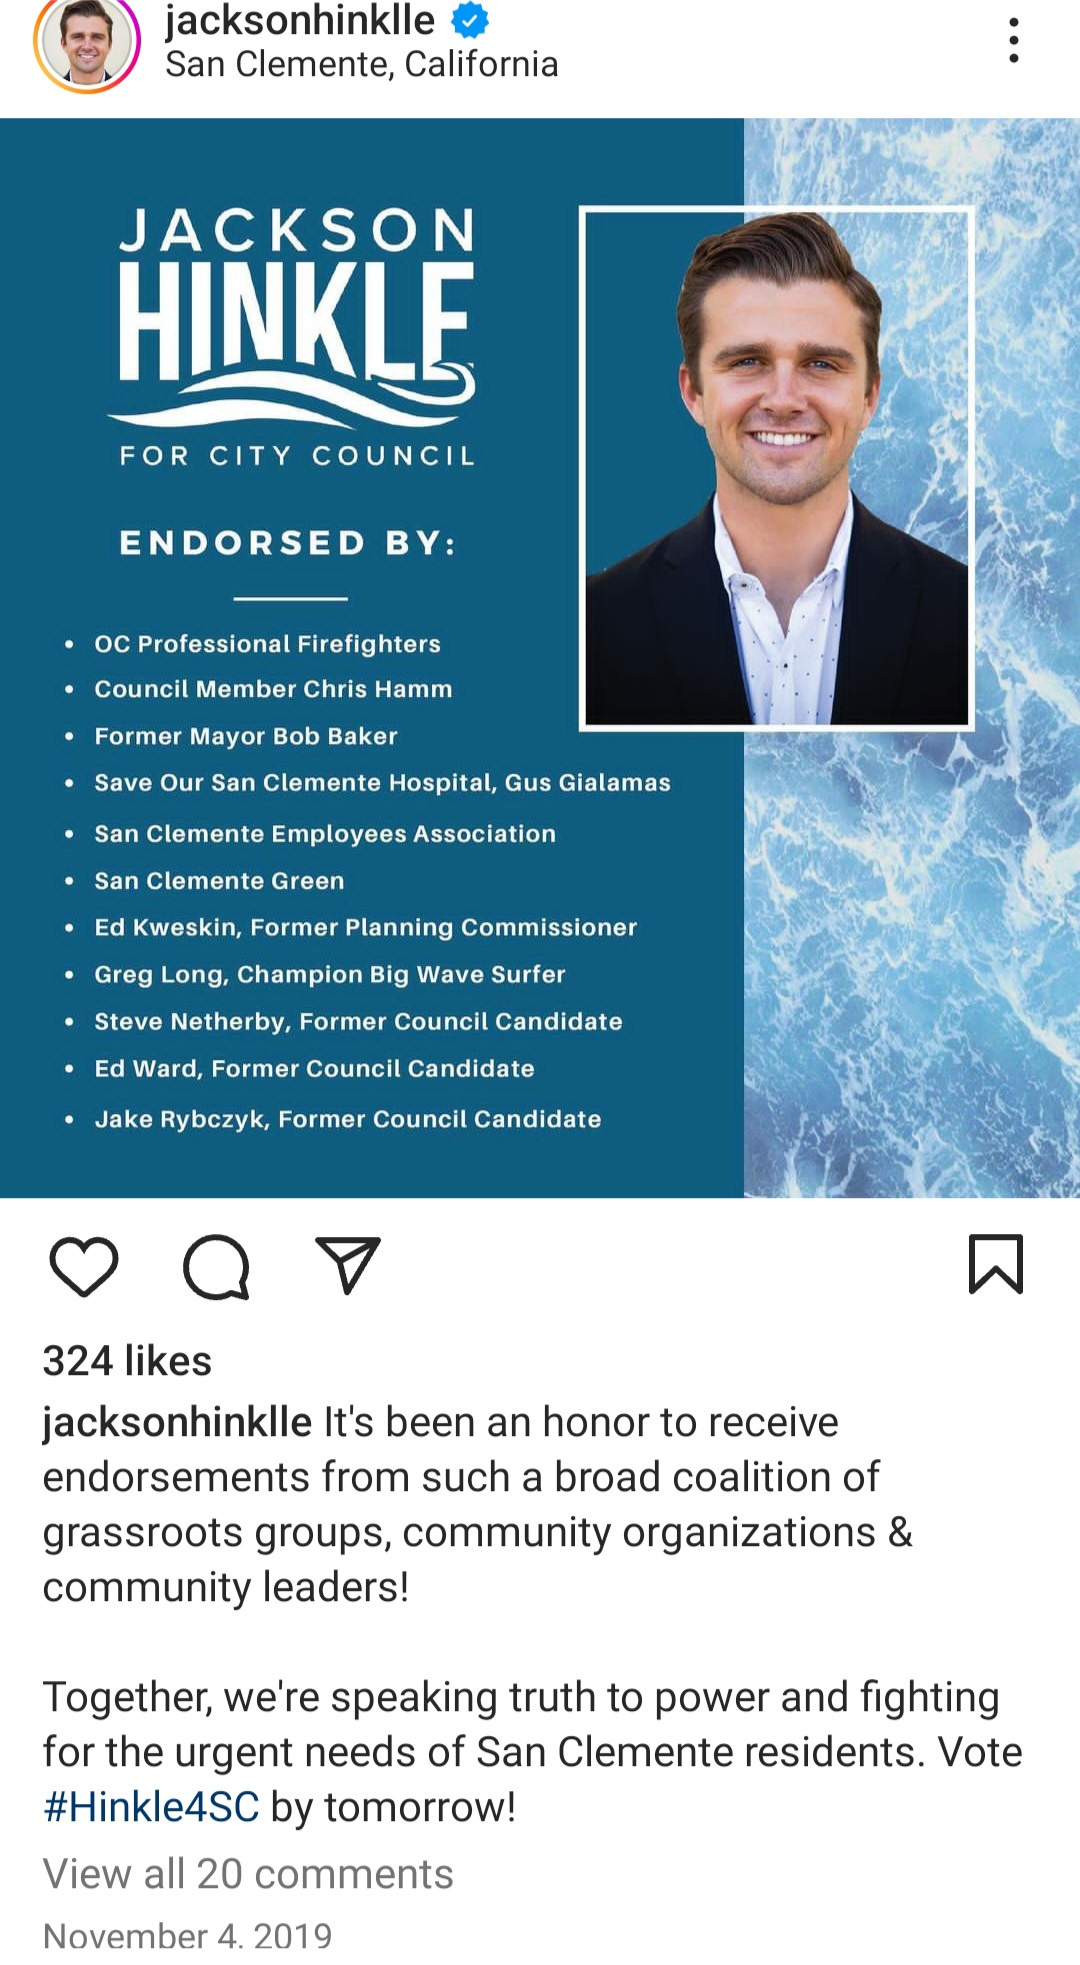 Jackson Hinkle's 2019 Instagram post touting his campaign for San Clemente City Council and the local groups who supported him.